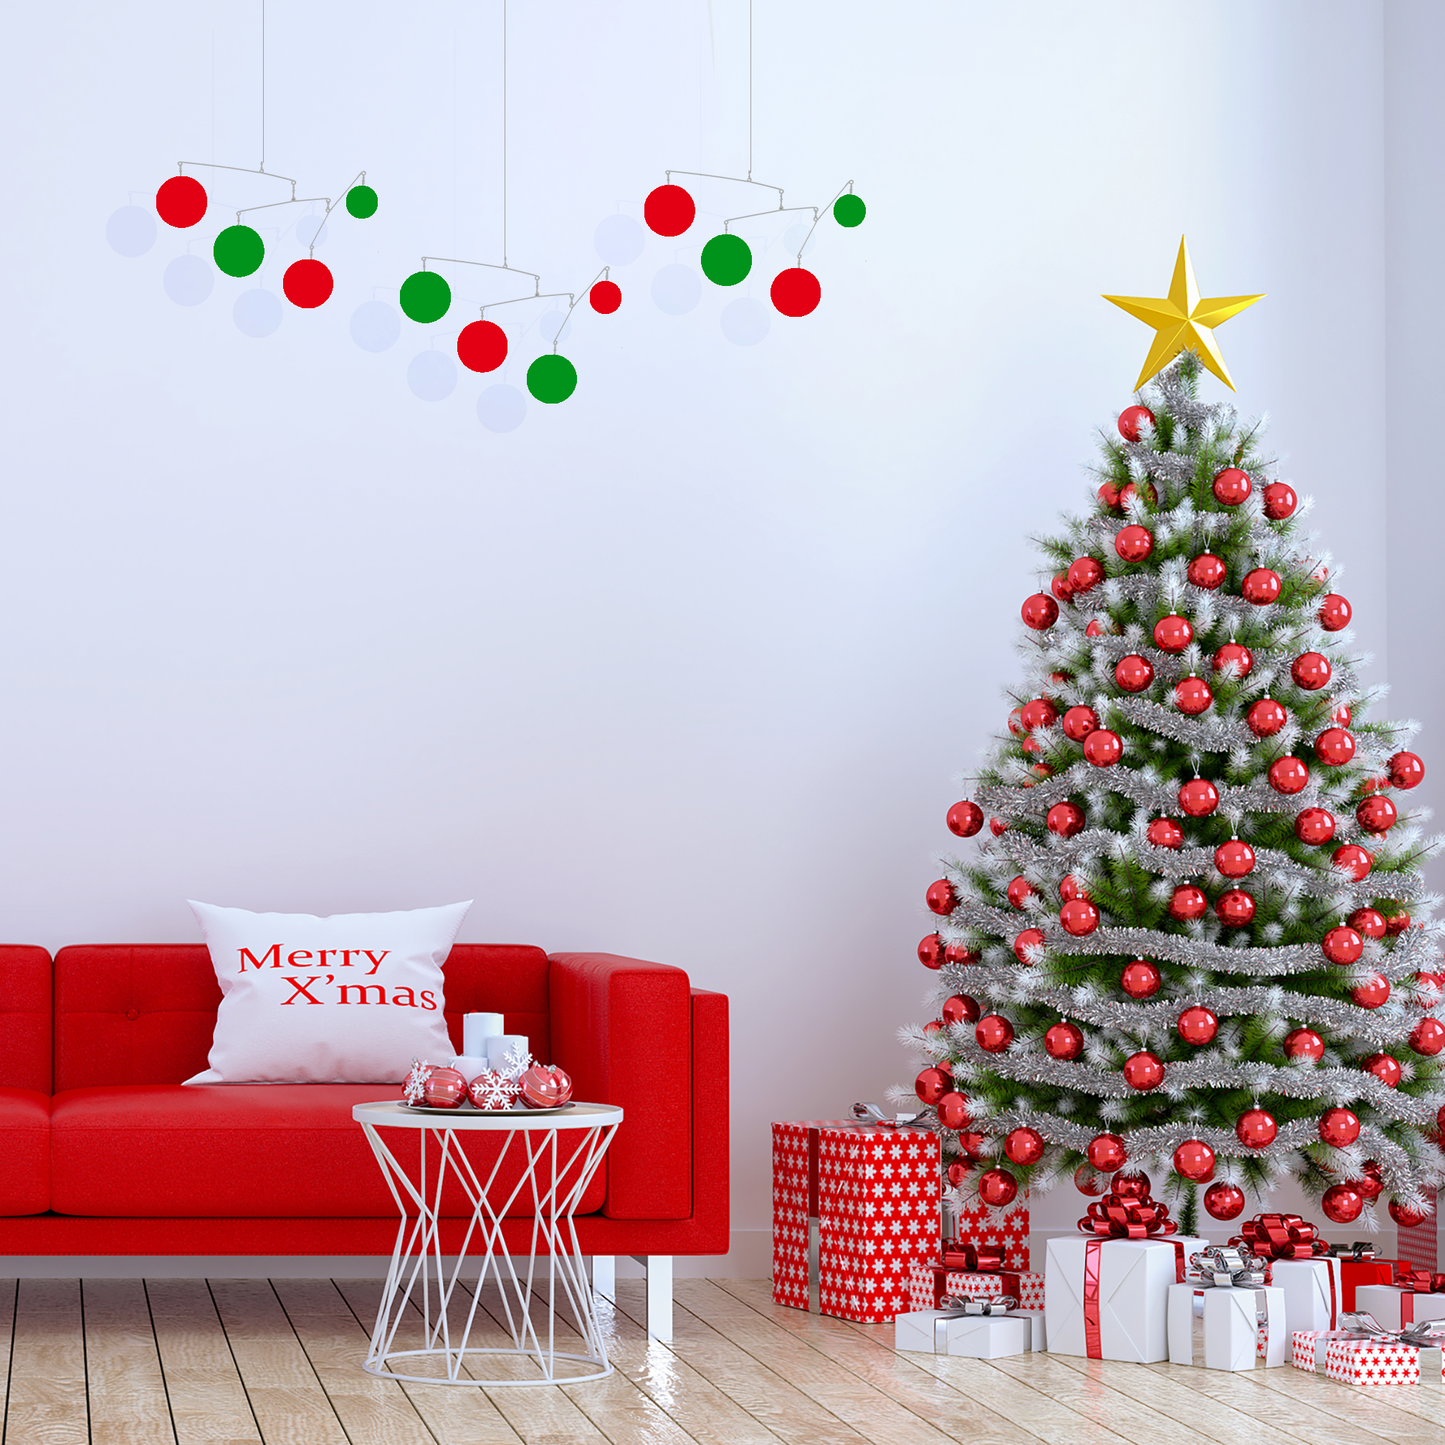 Christmas tree with ornaments and gifts next to mid century modern red sofa with 3 hanging art mobiles in red and green by AtomicMobiles.com